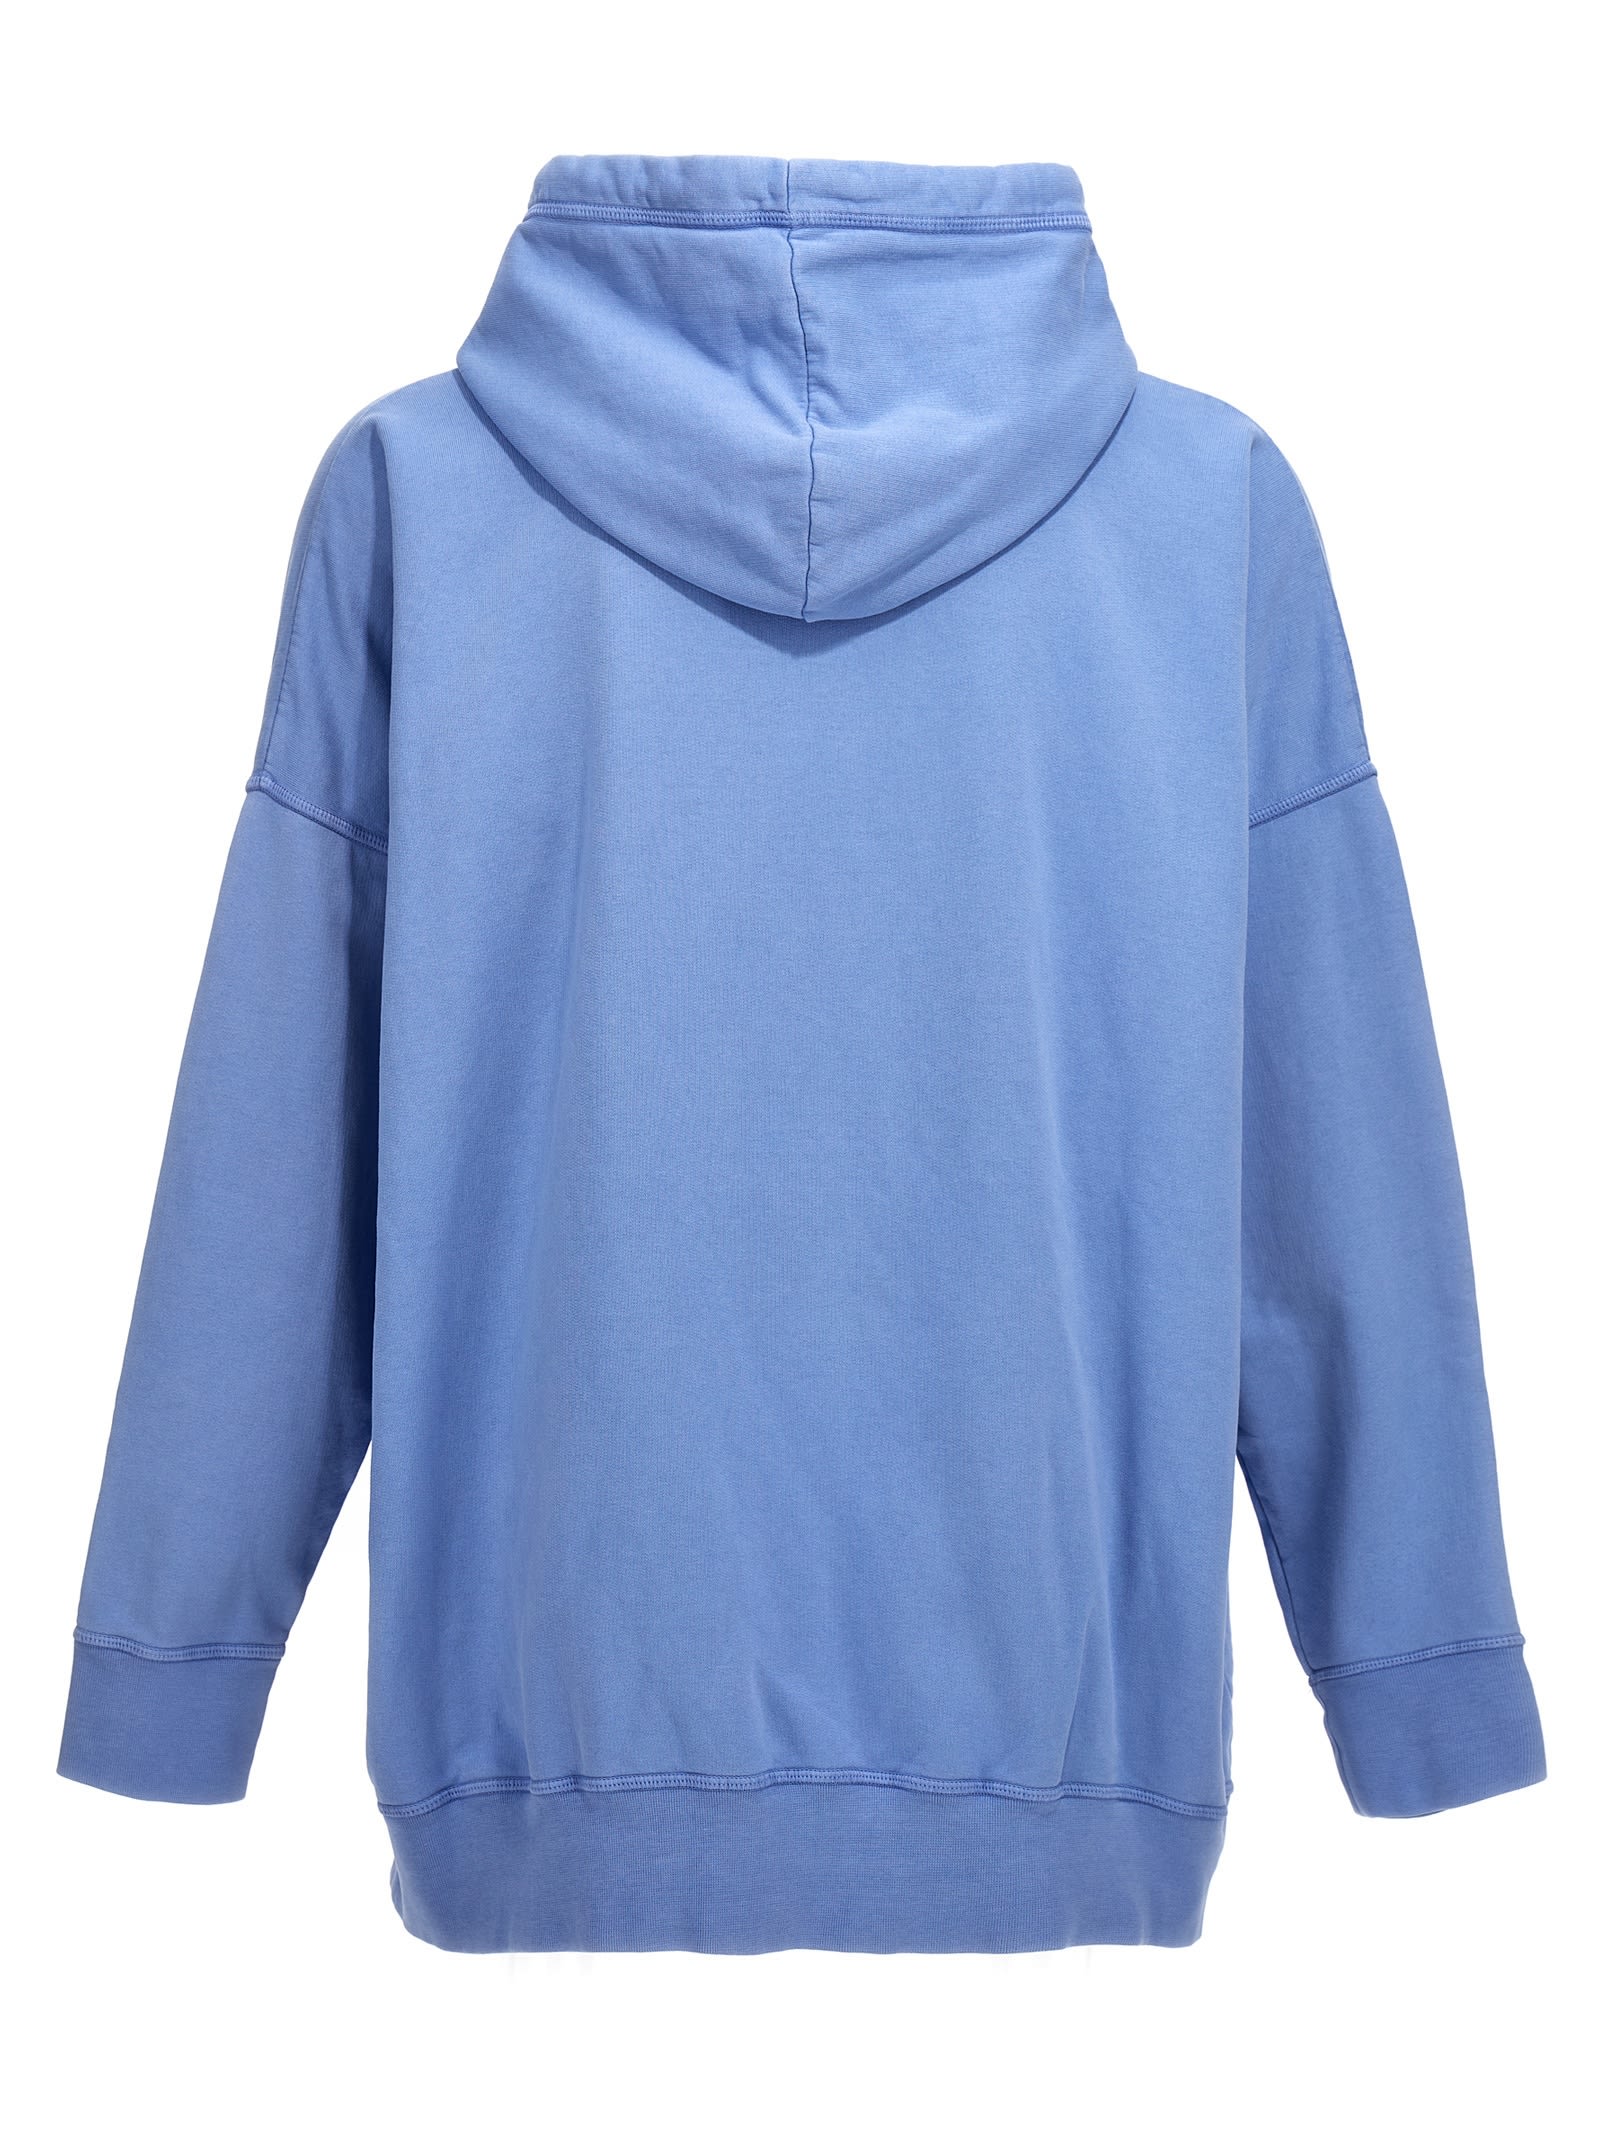 Shop Dsquared2 D2 On The Wave Hoodie In Light Blue